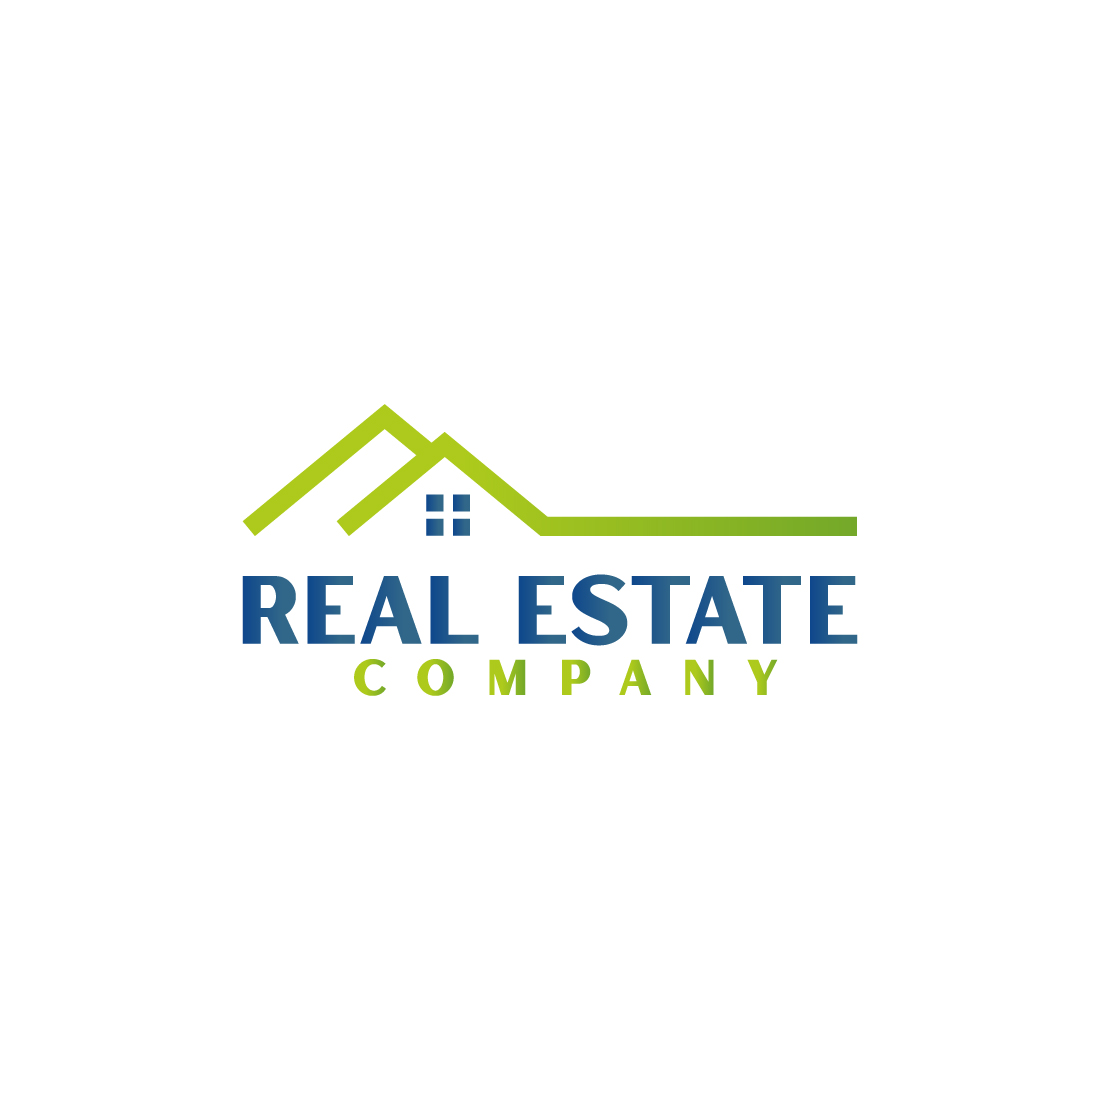 Real estate logo with green, dark blue color preview image.